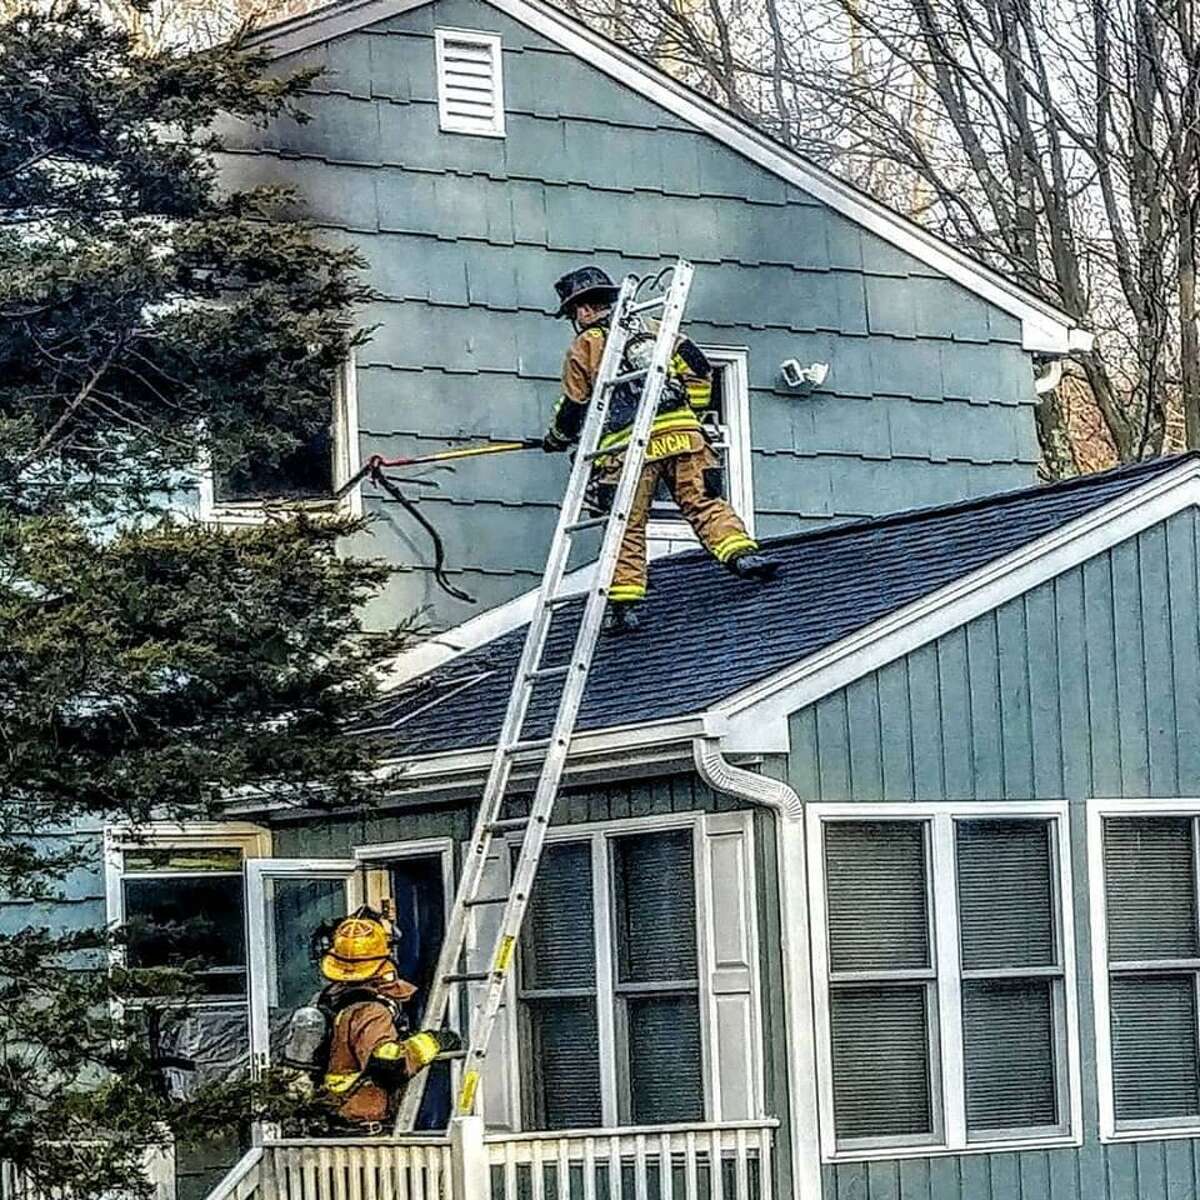 Shelton firefighters battled a blaze at a Gray Street home Feb. 10, 2019, that involved several crews, but no one was injured and damage was kept mostly to one part of the house.